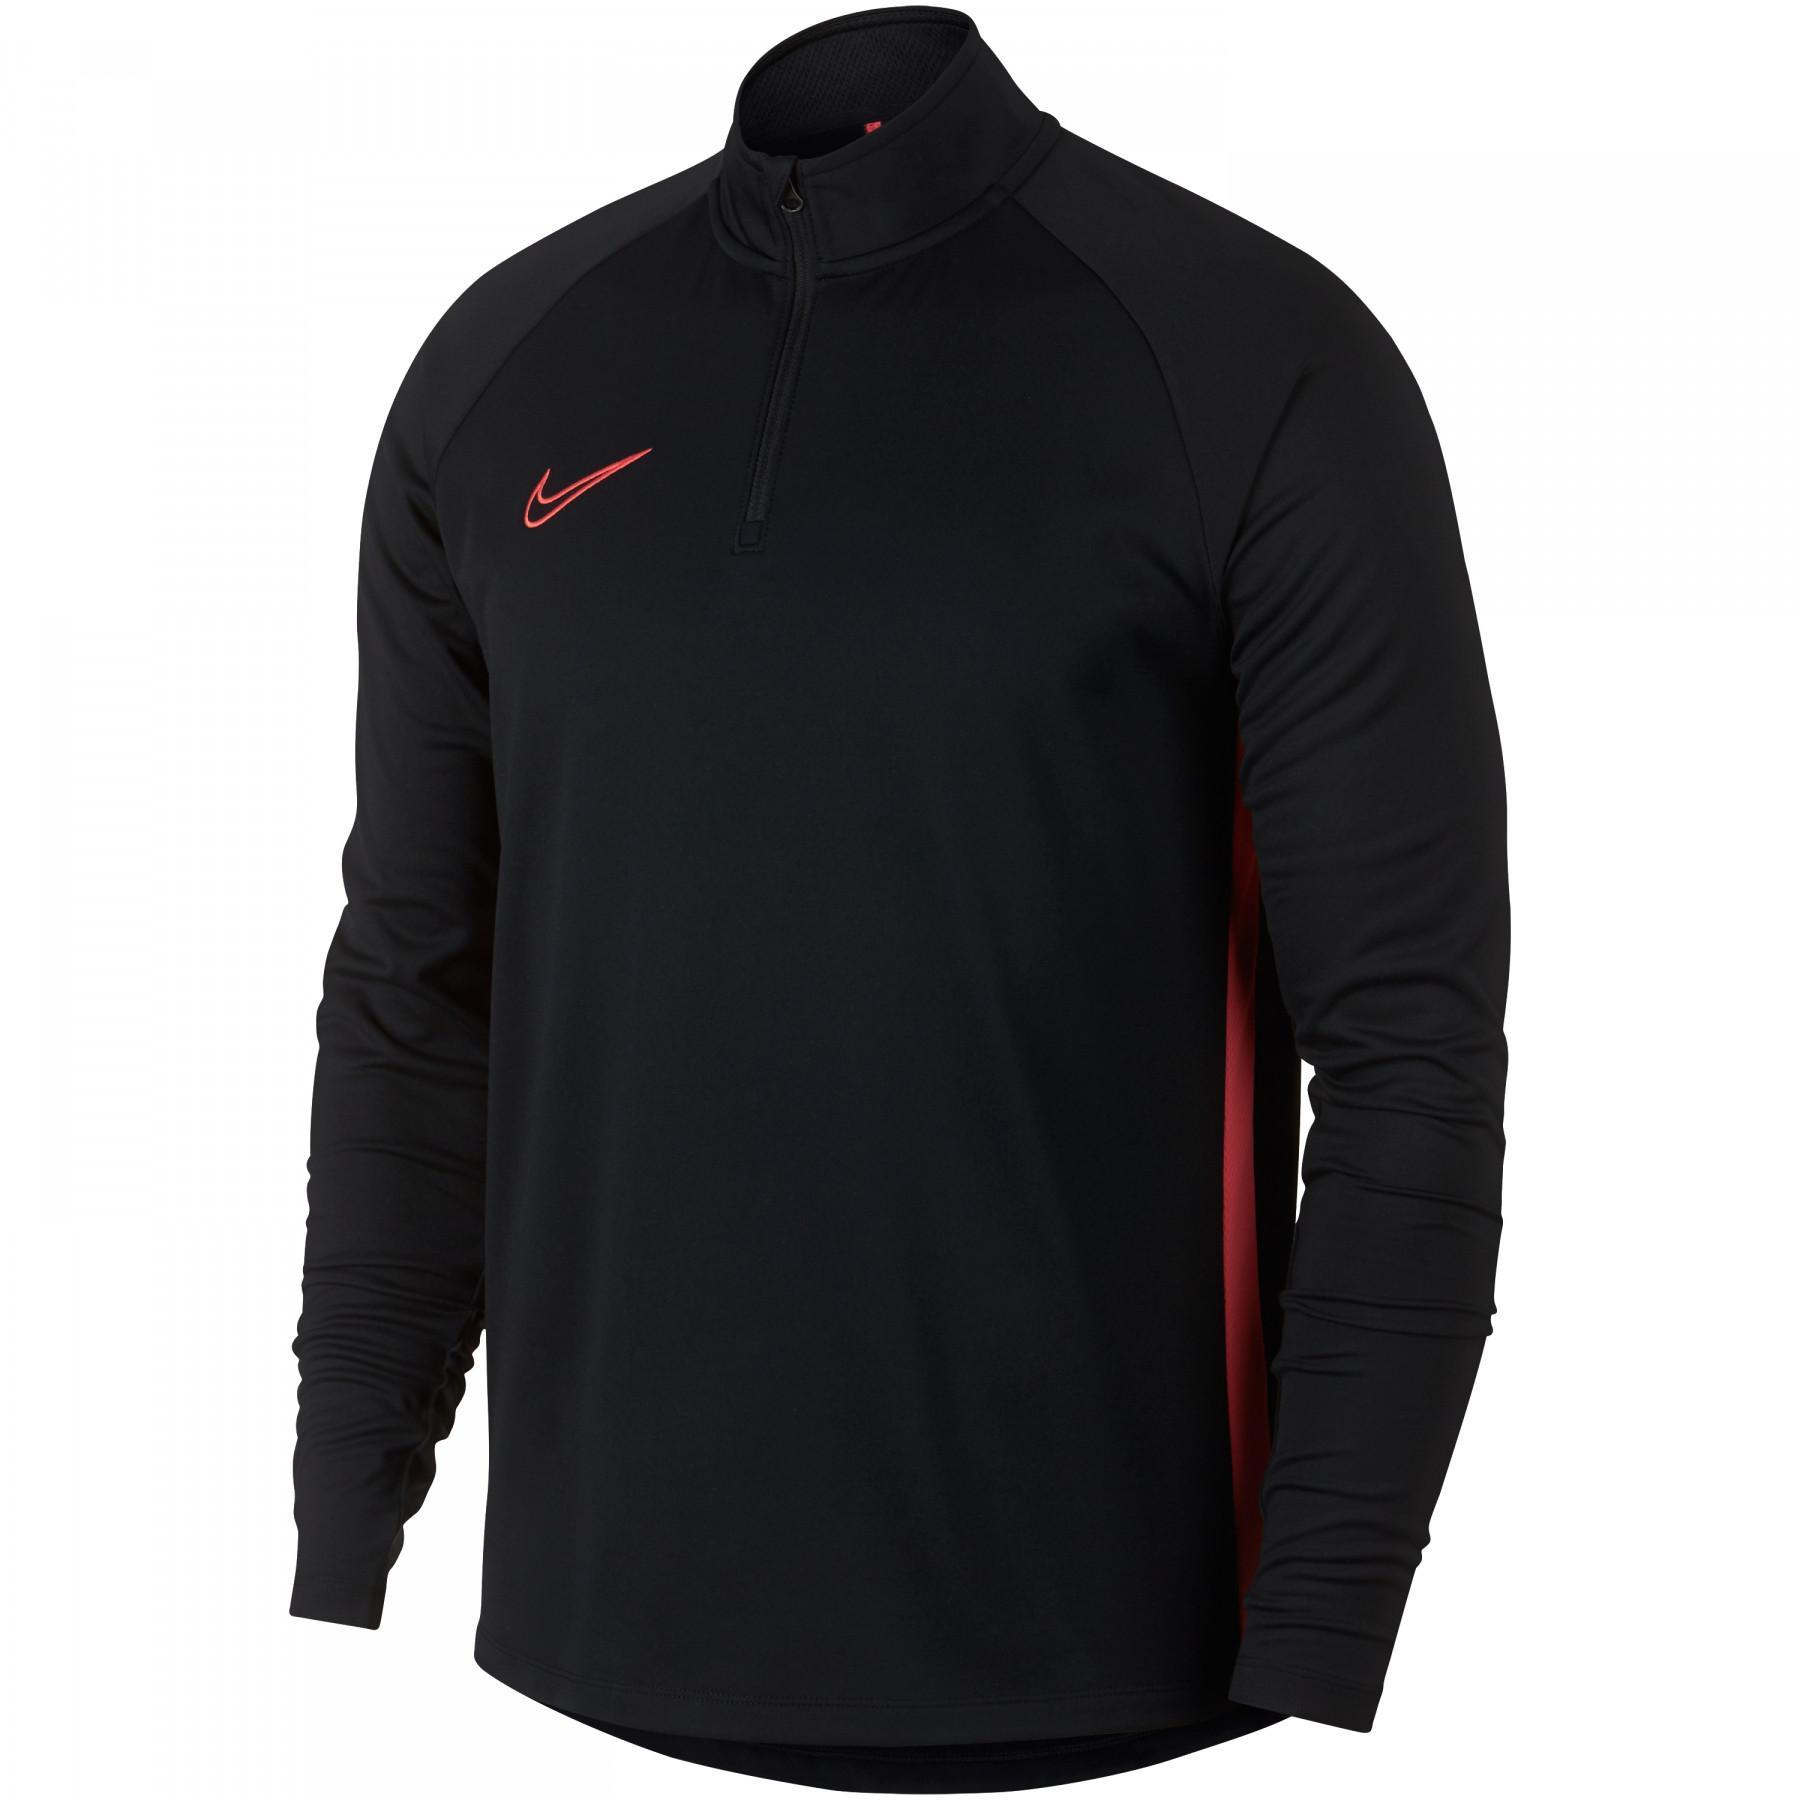 Training top Nike Dry-FIT Academy